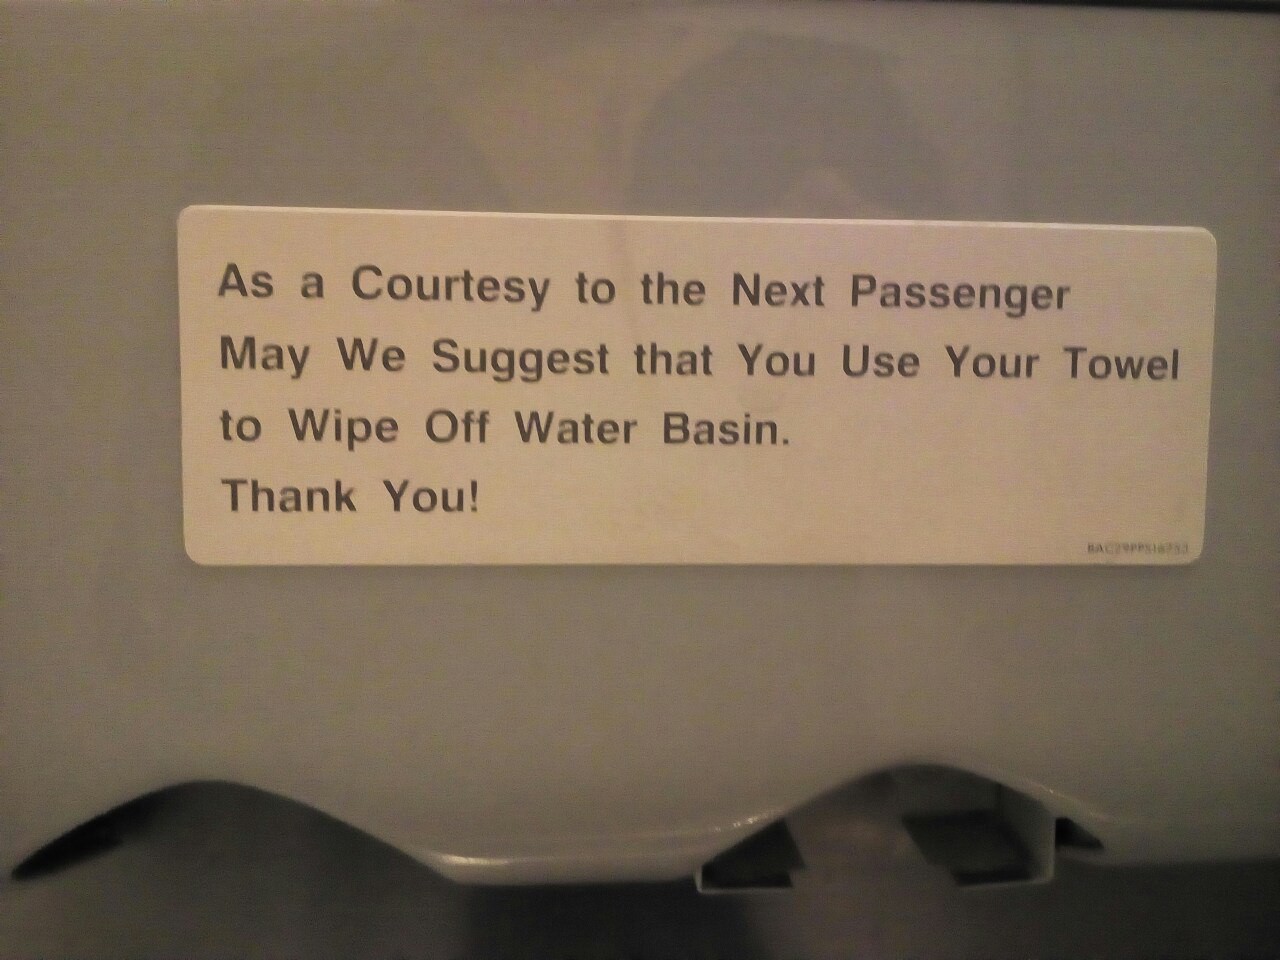 As a Courtesy to the Next Passenger May We Suggest that You Use Your Towel to Wipe Off the Water Basin. Thank You!